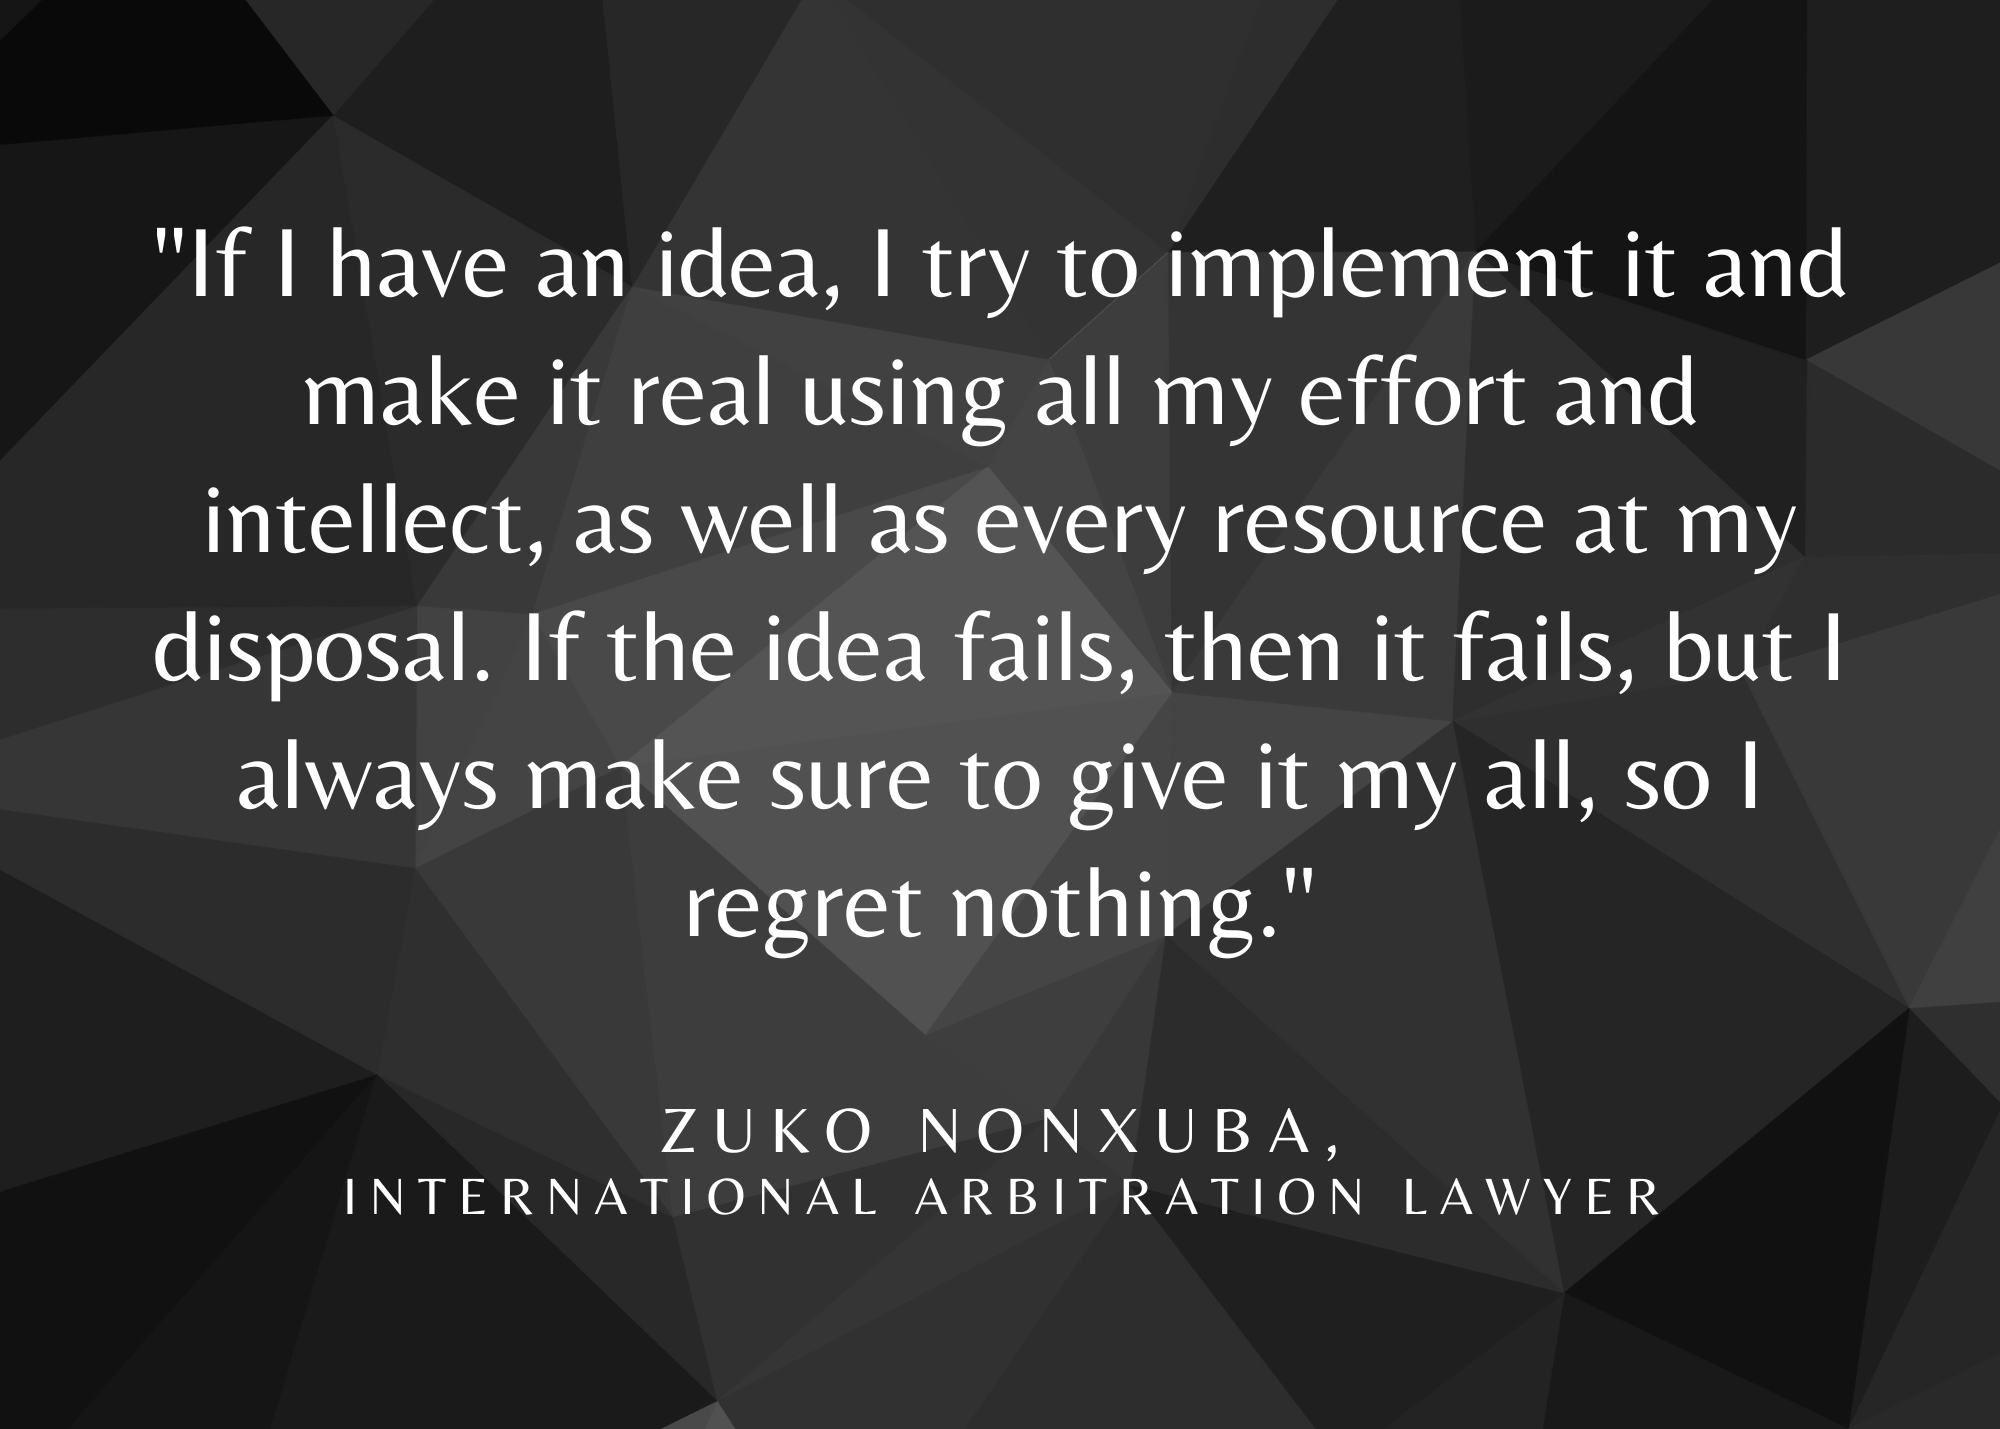 South African Lawyer Zuko Nonxuba Announces the Launch of His Professional Website